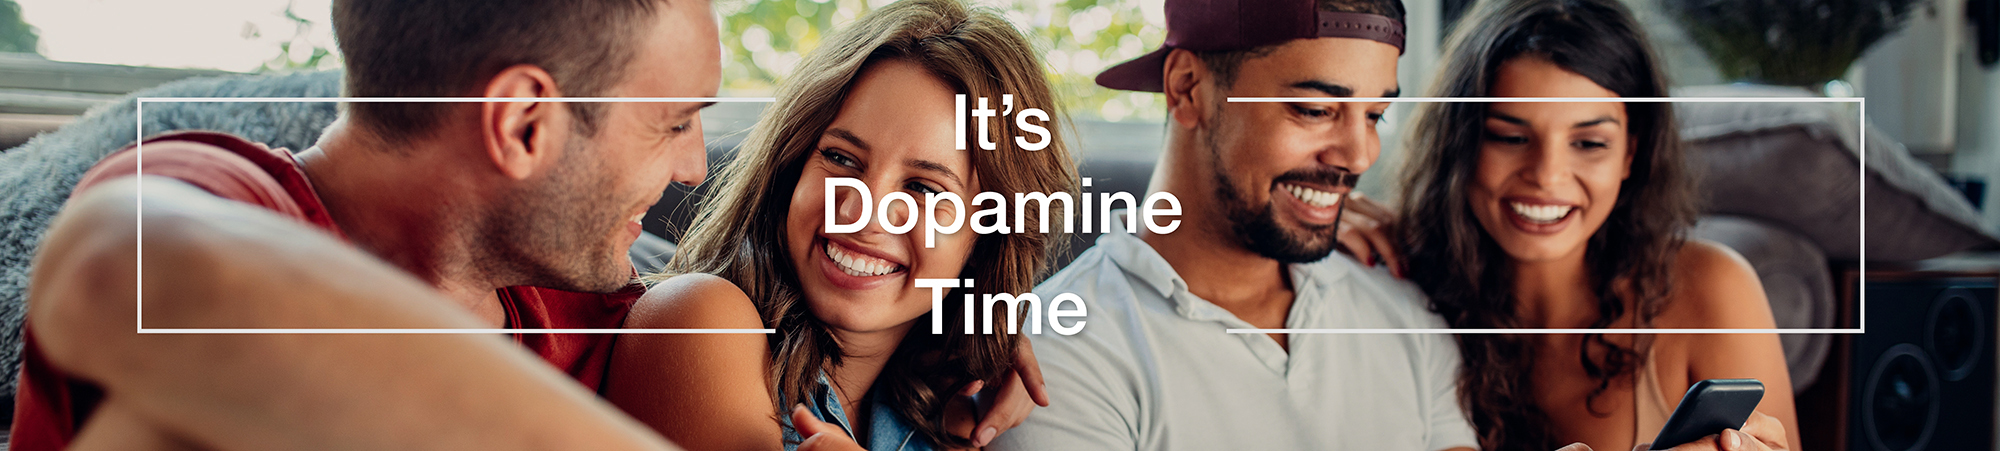 It's Dopamine Time Banner